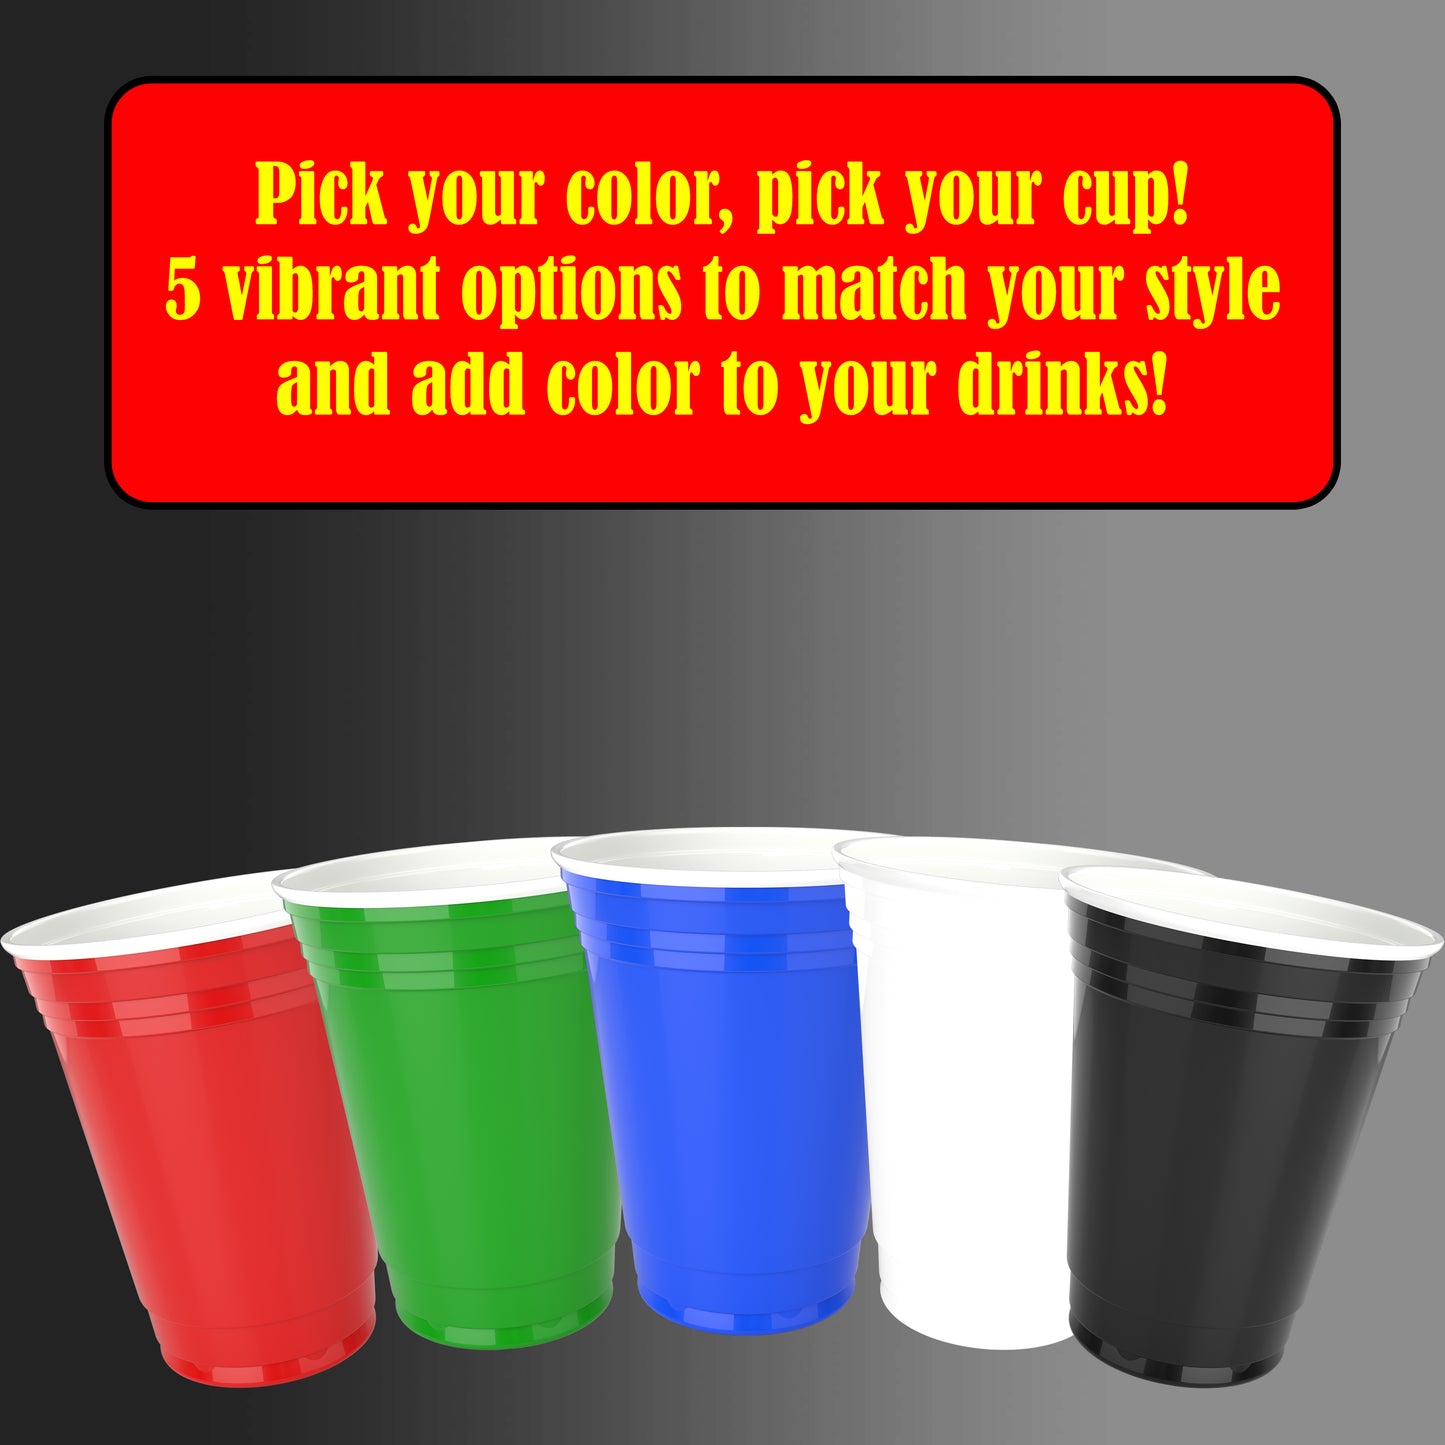 Blue Disposable Plastic Cups [100 Pack 16 oz.] Party & Fun Pong Cups - Durable Cups for Water, Beer, Booze, Smoothie, Games - Large Cold Drink Cups